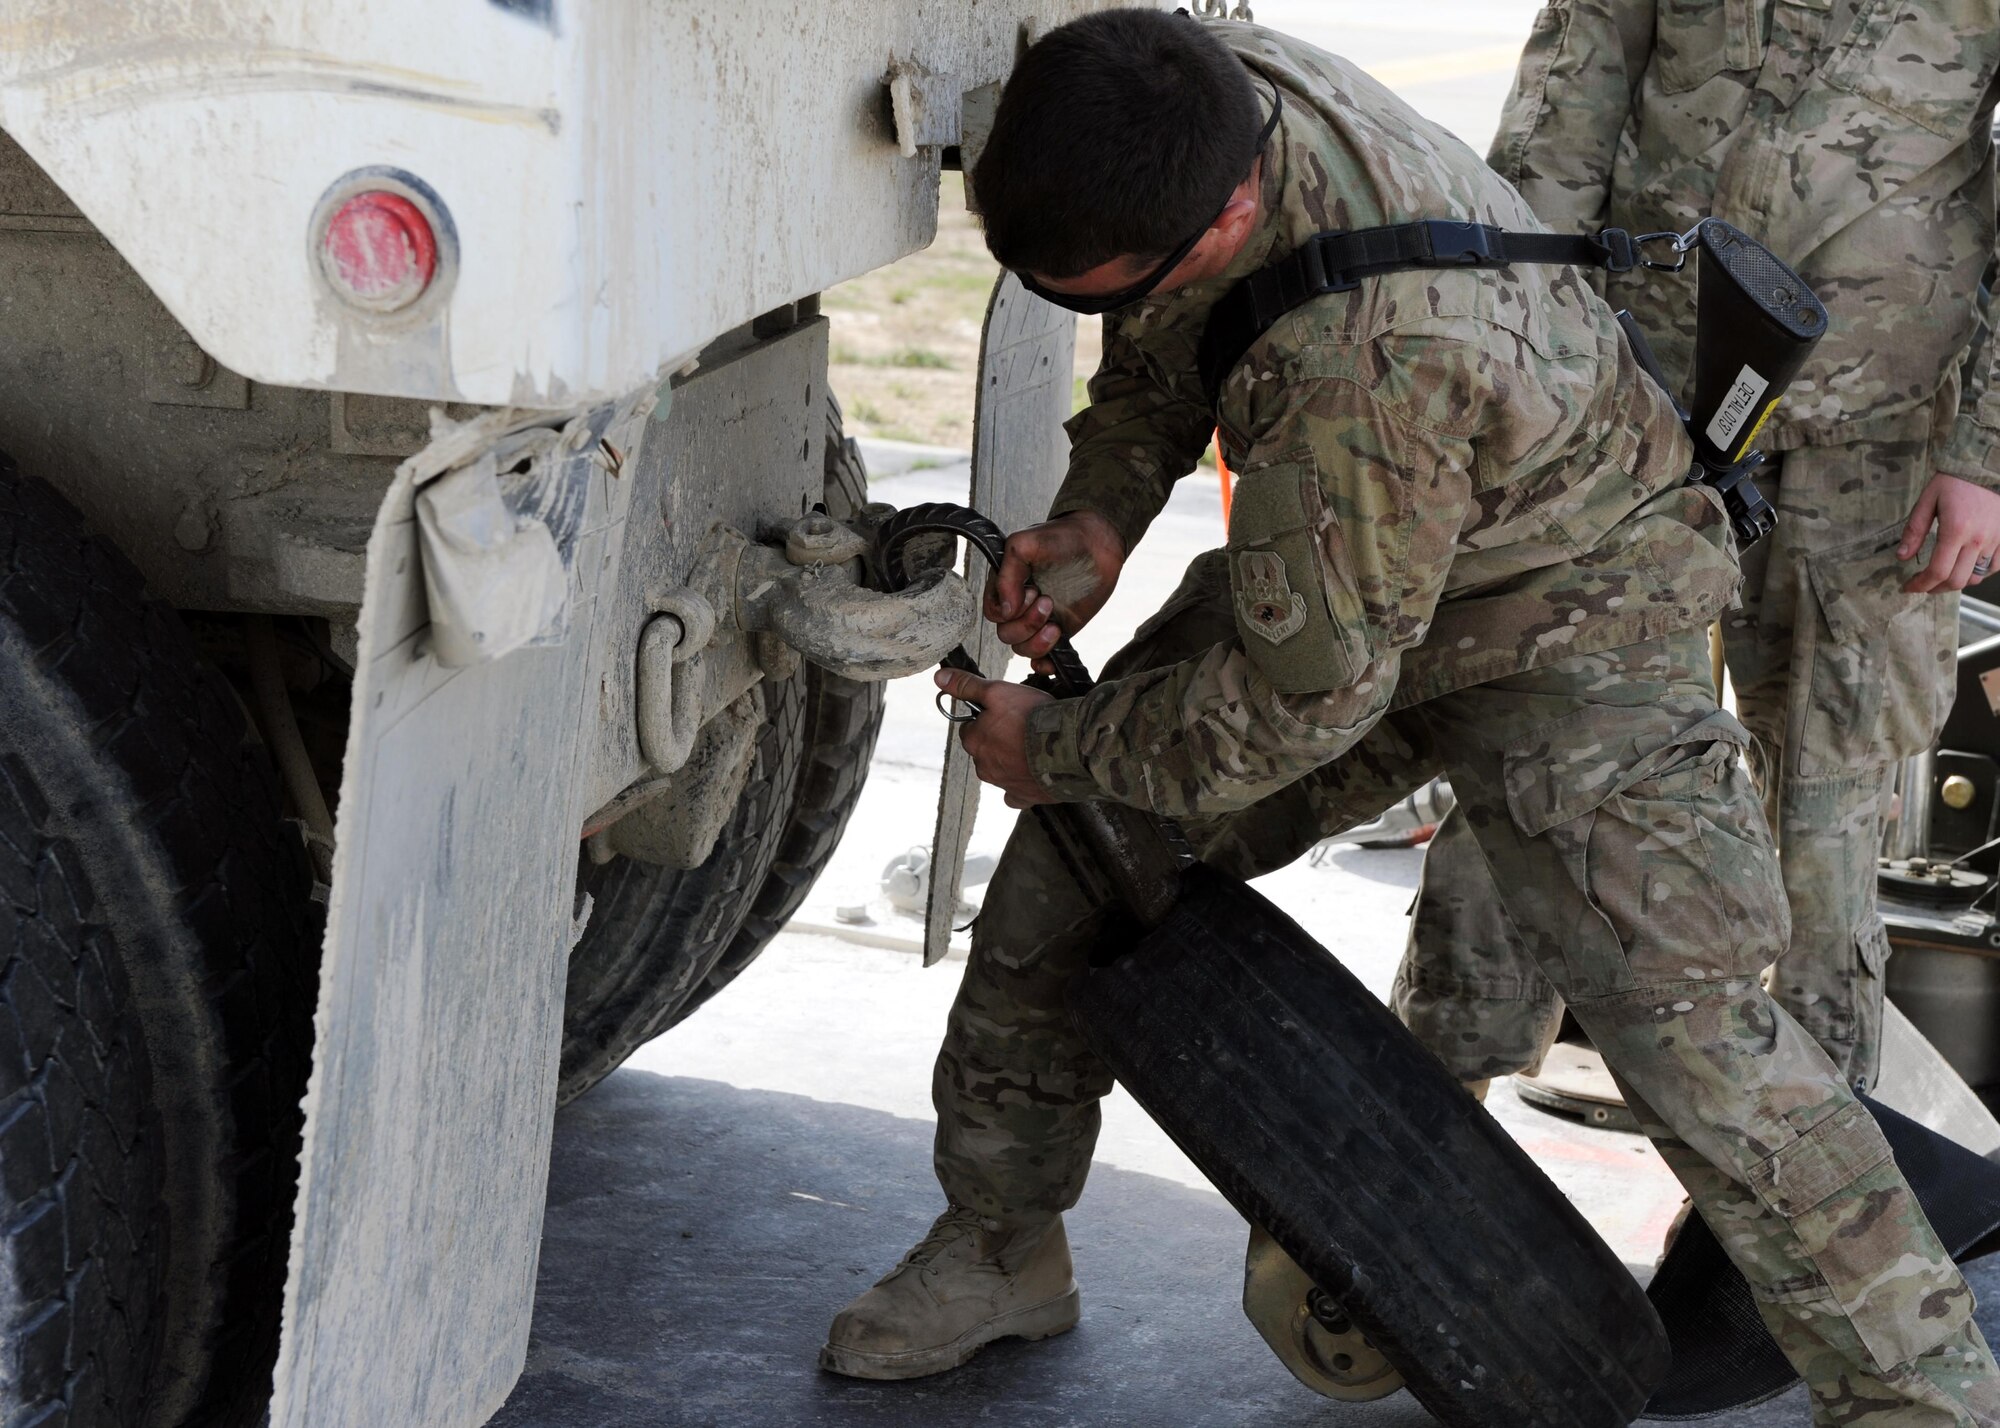 U.S. Air Force Senior Airman Bob Roberts, 455th Expeditionary Civil Engineer Squadron power production journeyman, attaches a tire to a truck prior to testing a Mobile Aircraft Arresting System March 18, 2015 at Bagram Airfield, Afghanistan. The MAAS was from a separate taxiway as part of the construction of an alternate runway at Bagram. (U.S. Air Force photo by Staff Sgt. Whitney Amstutz/released)